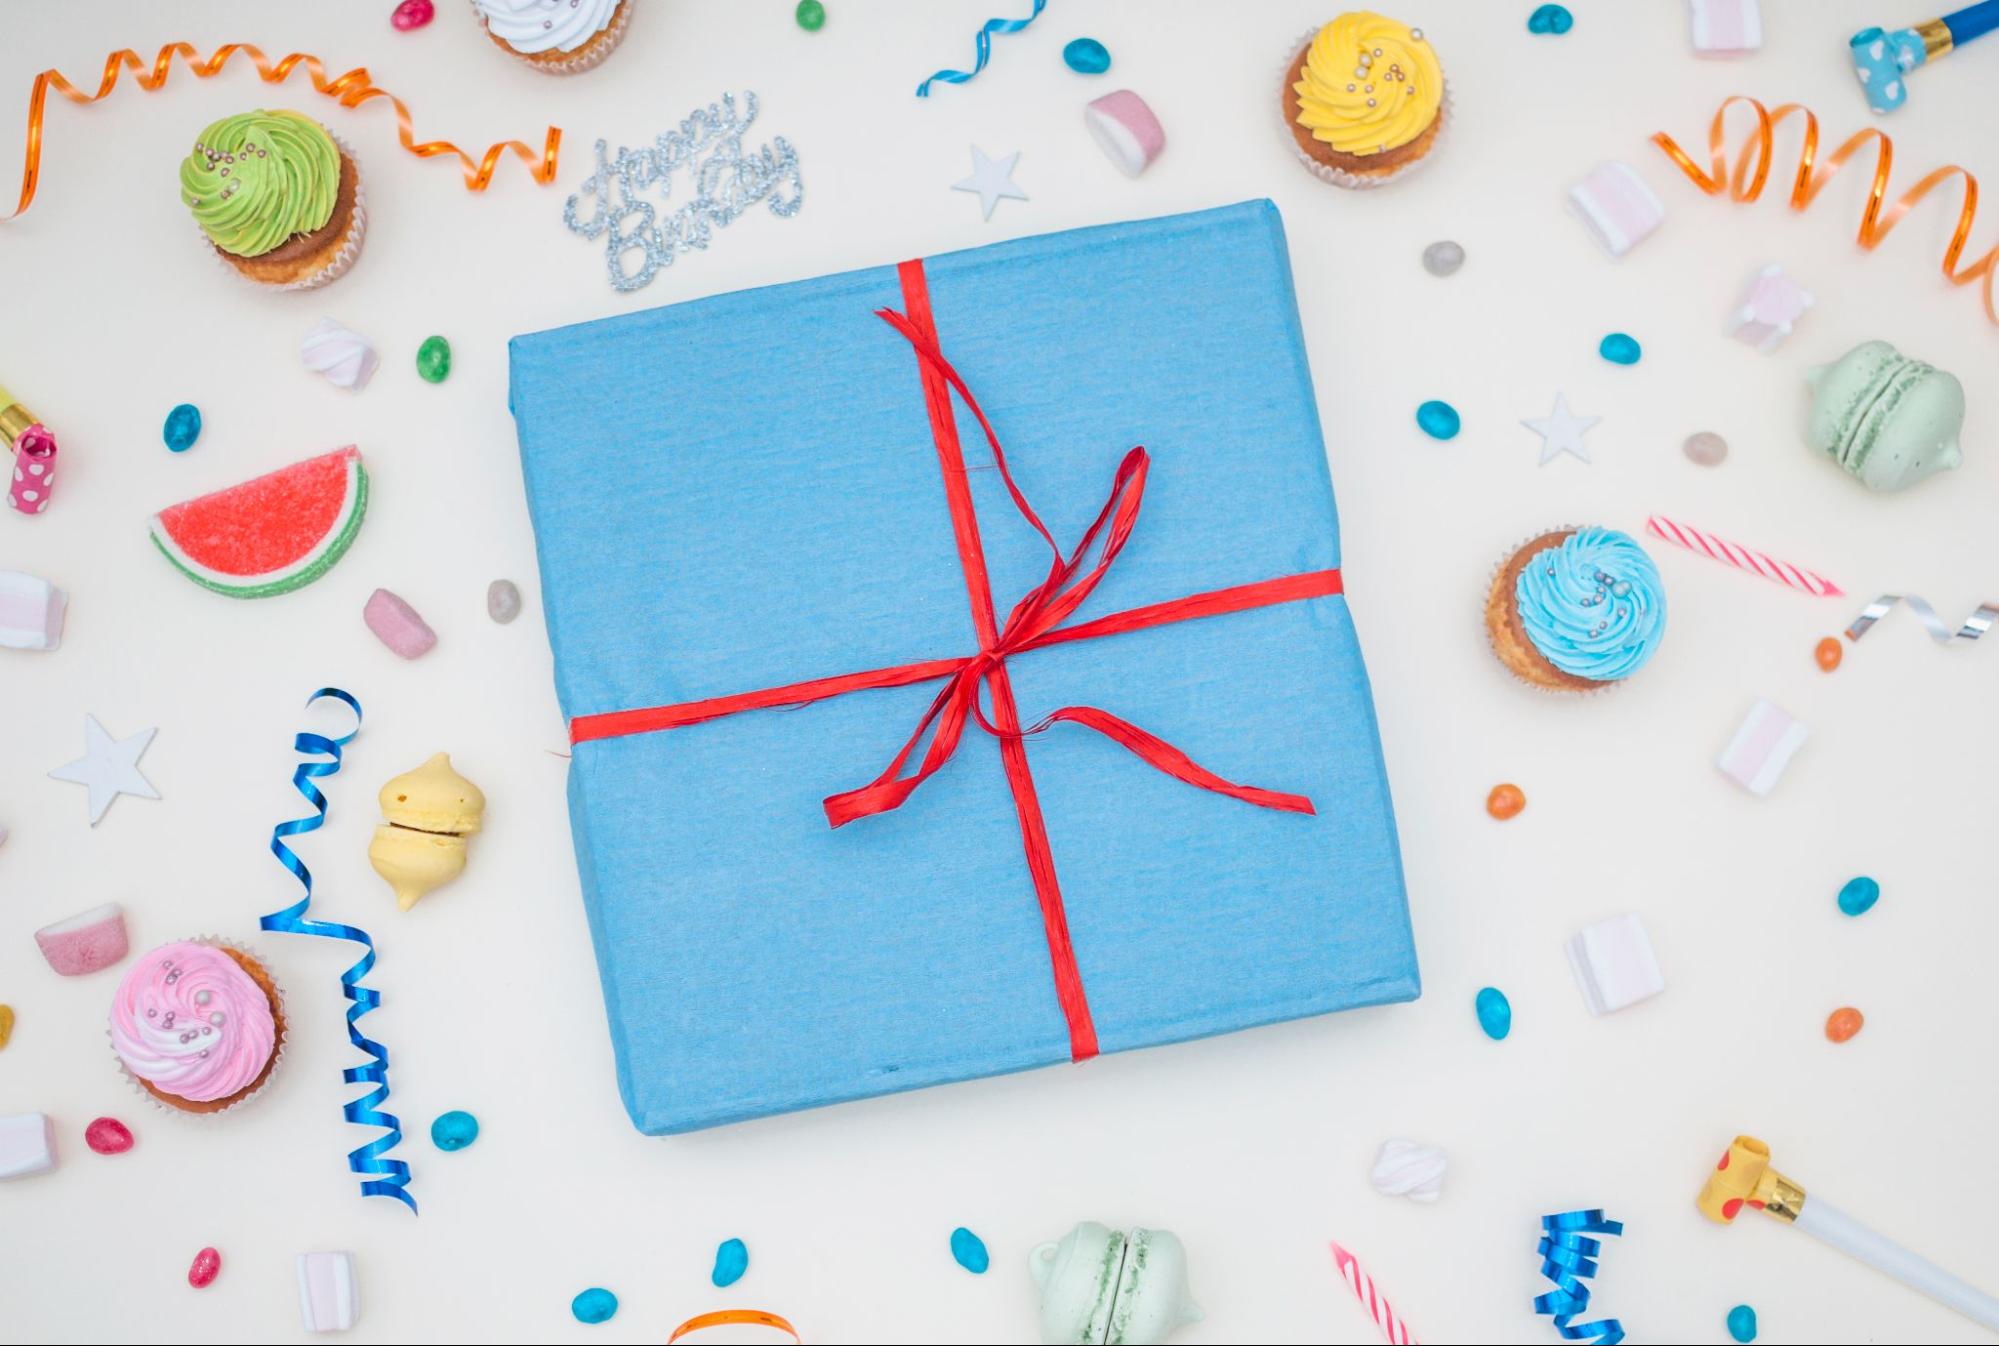 A personalized Puzzle Birthday Gift: a vibrant blue gift box amidst a shower of confetti and colorful confetti